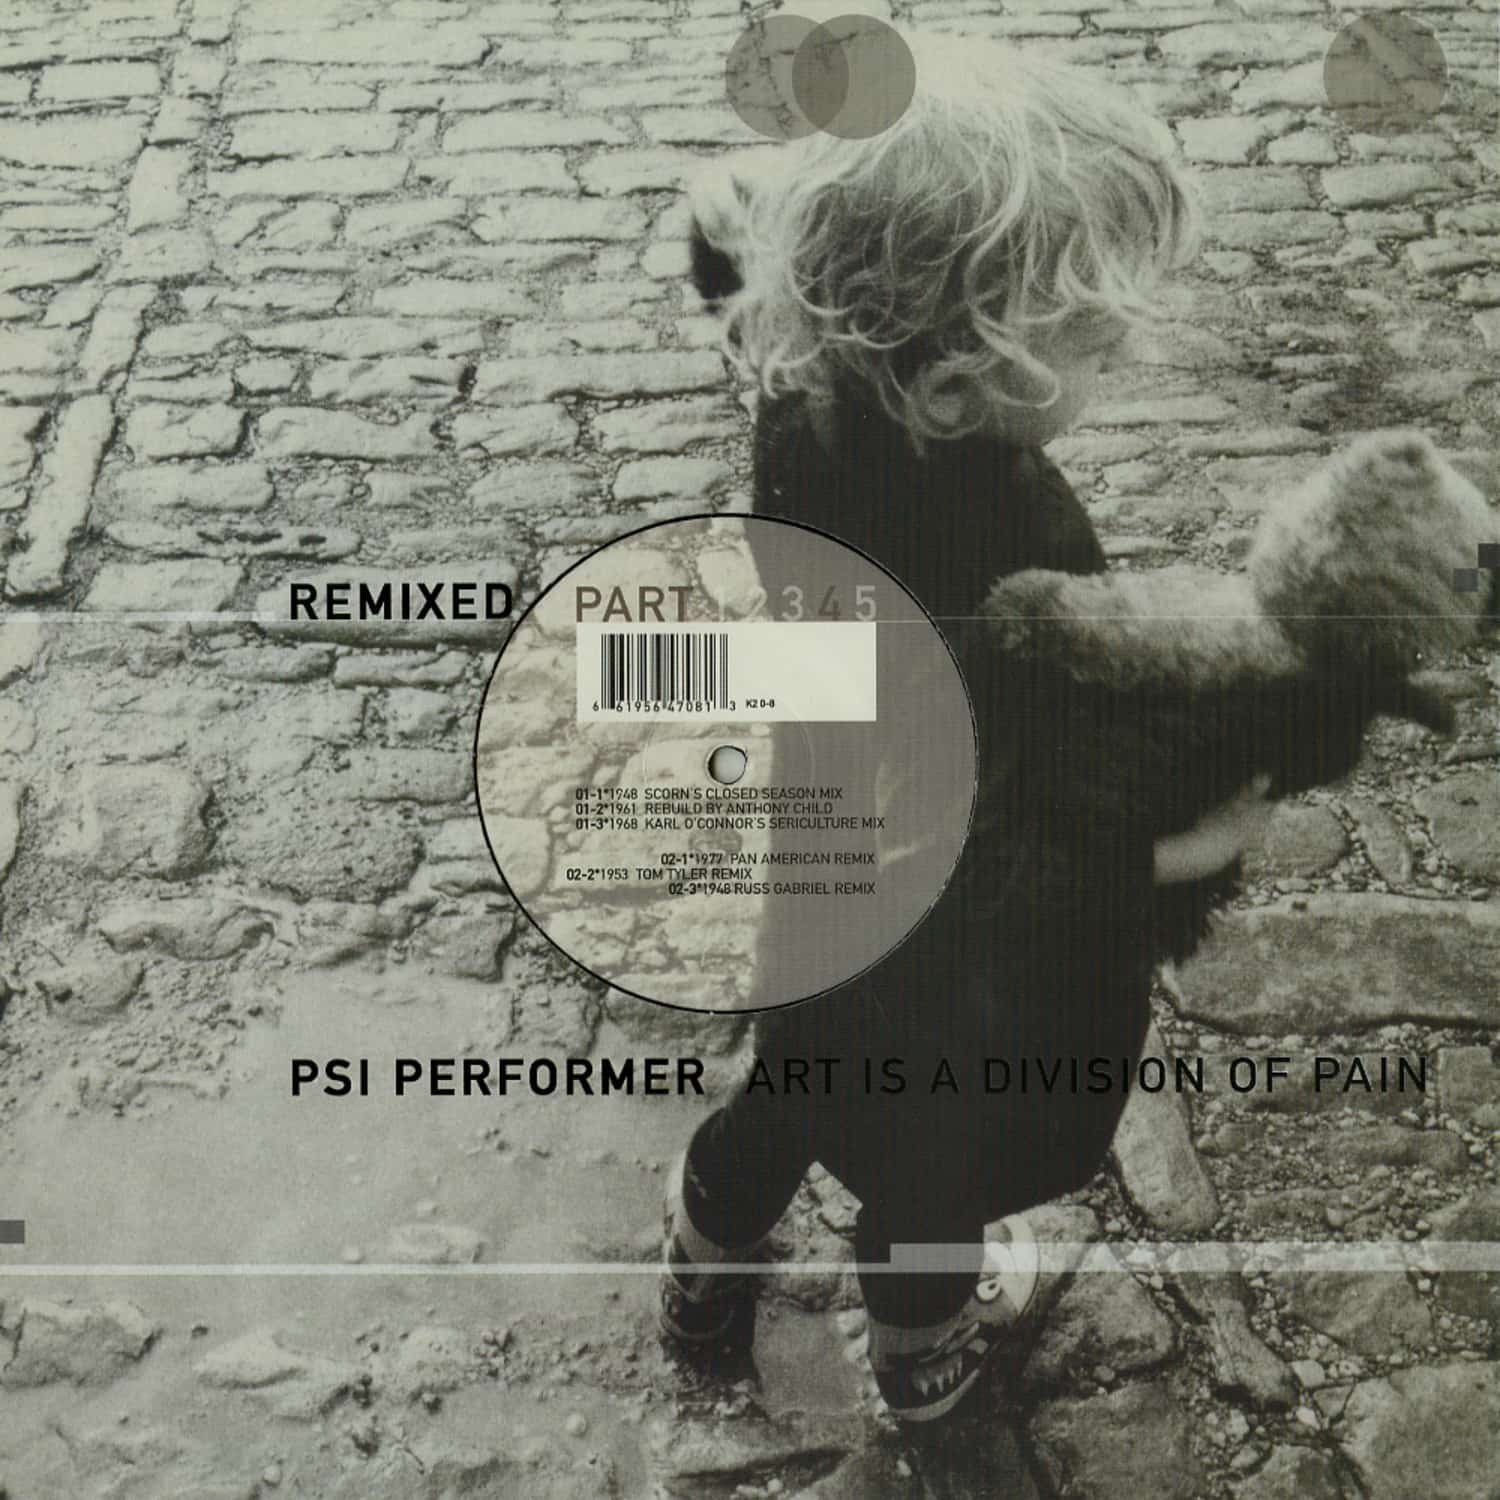 PSI Performer - ART IS A DIVISION OF PAIN REMIXED PT. 4